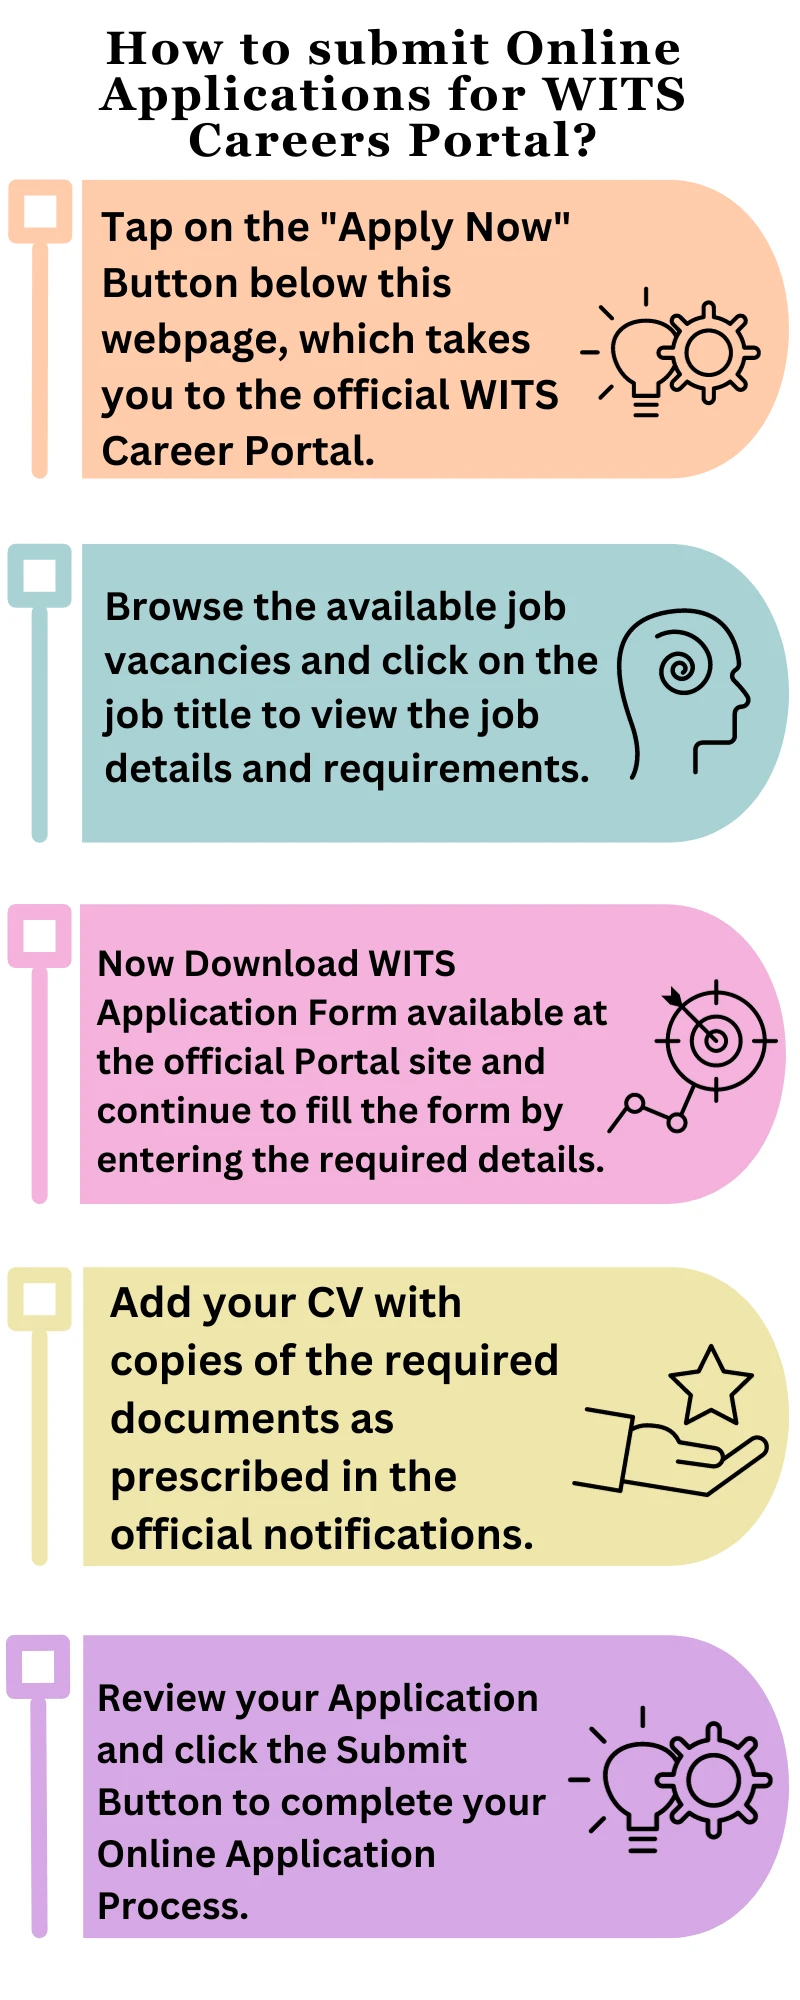 How to submit Online Applications for WITS Careers Portal?